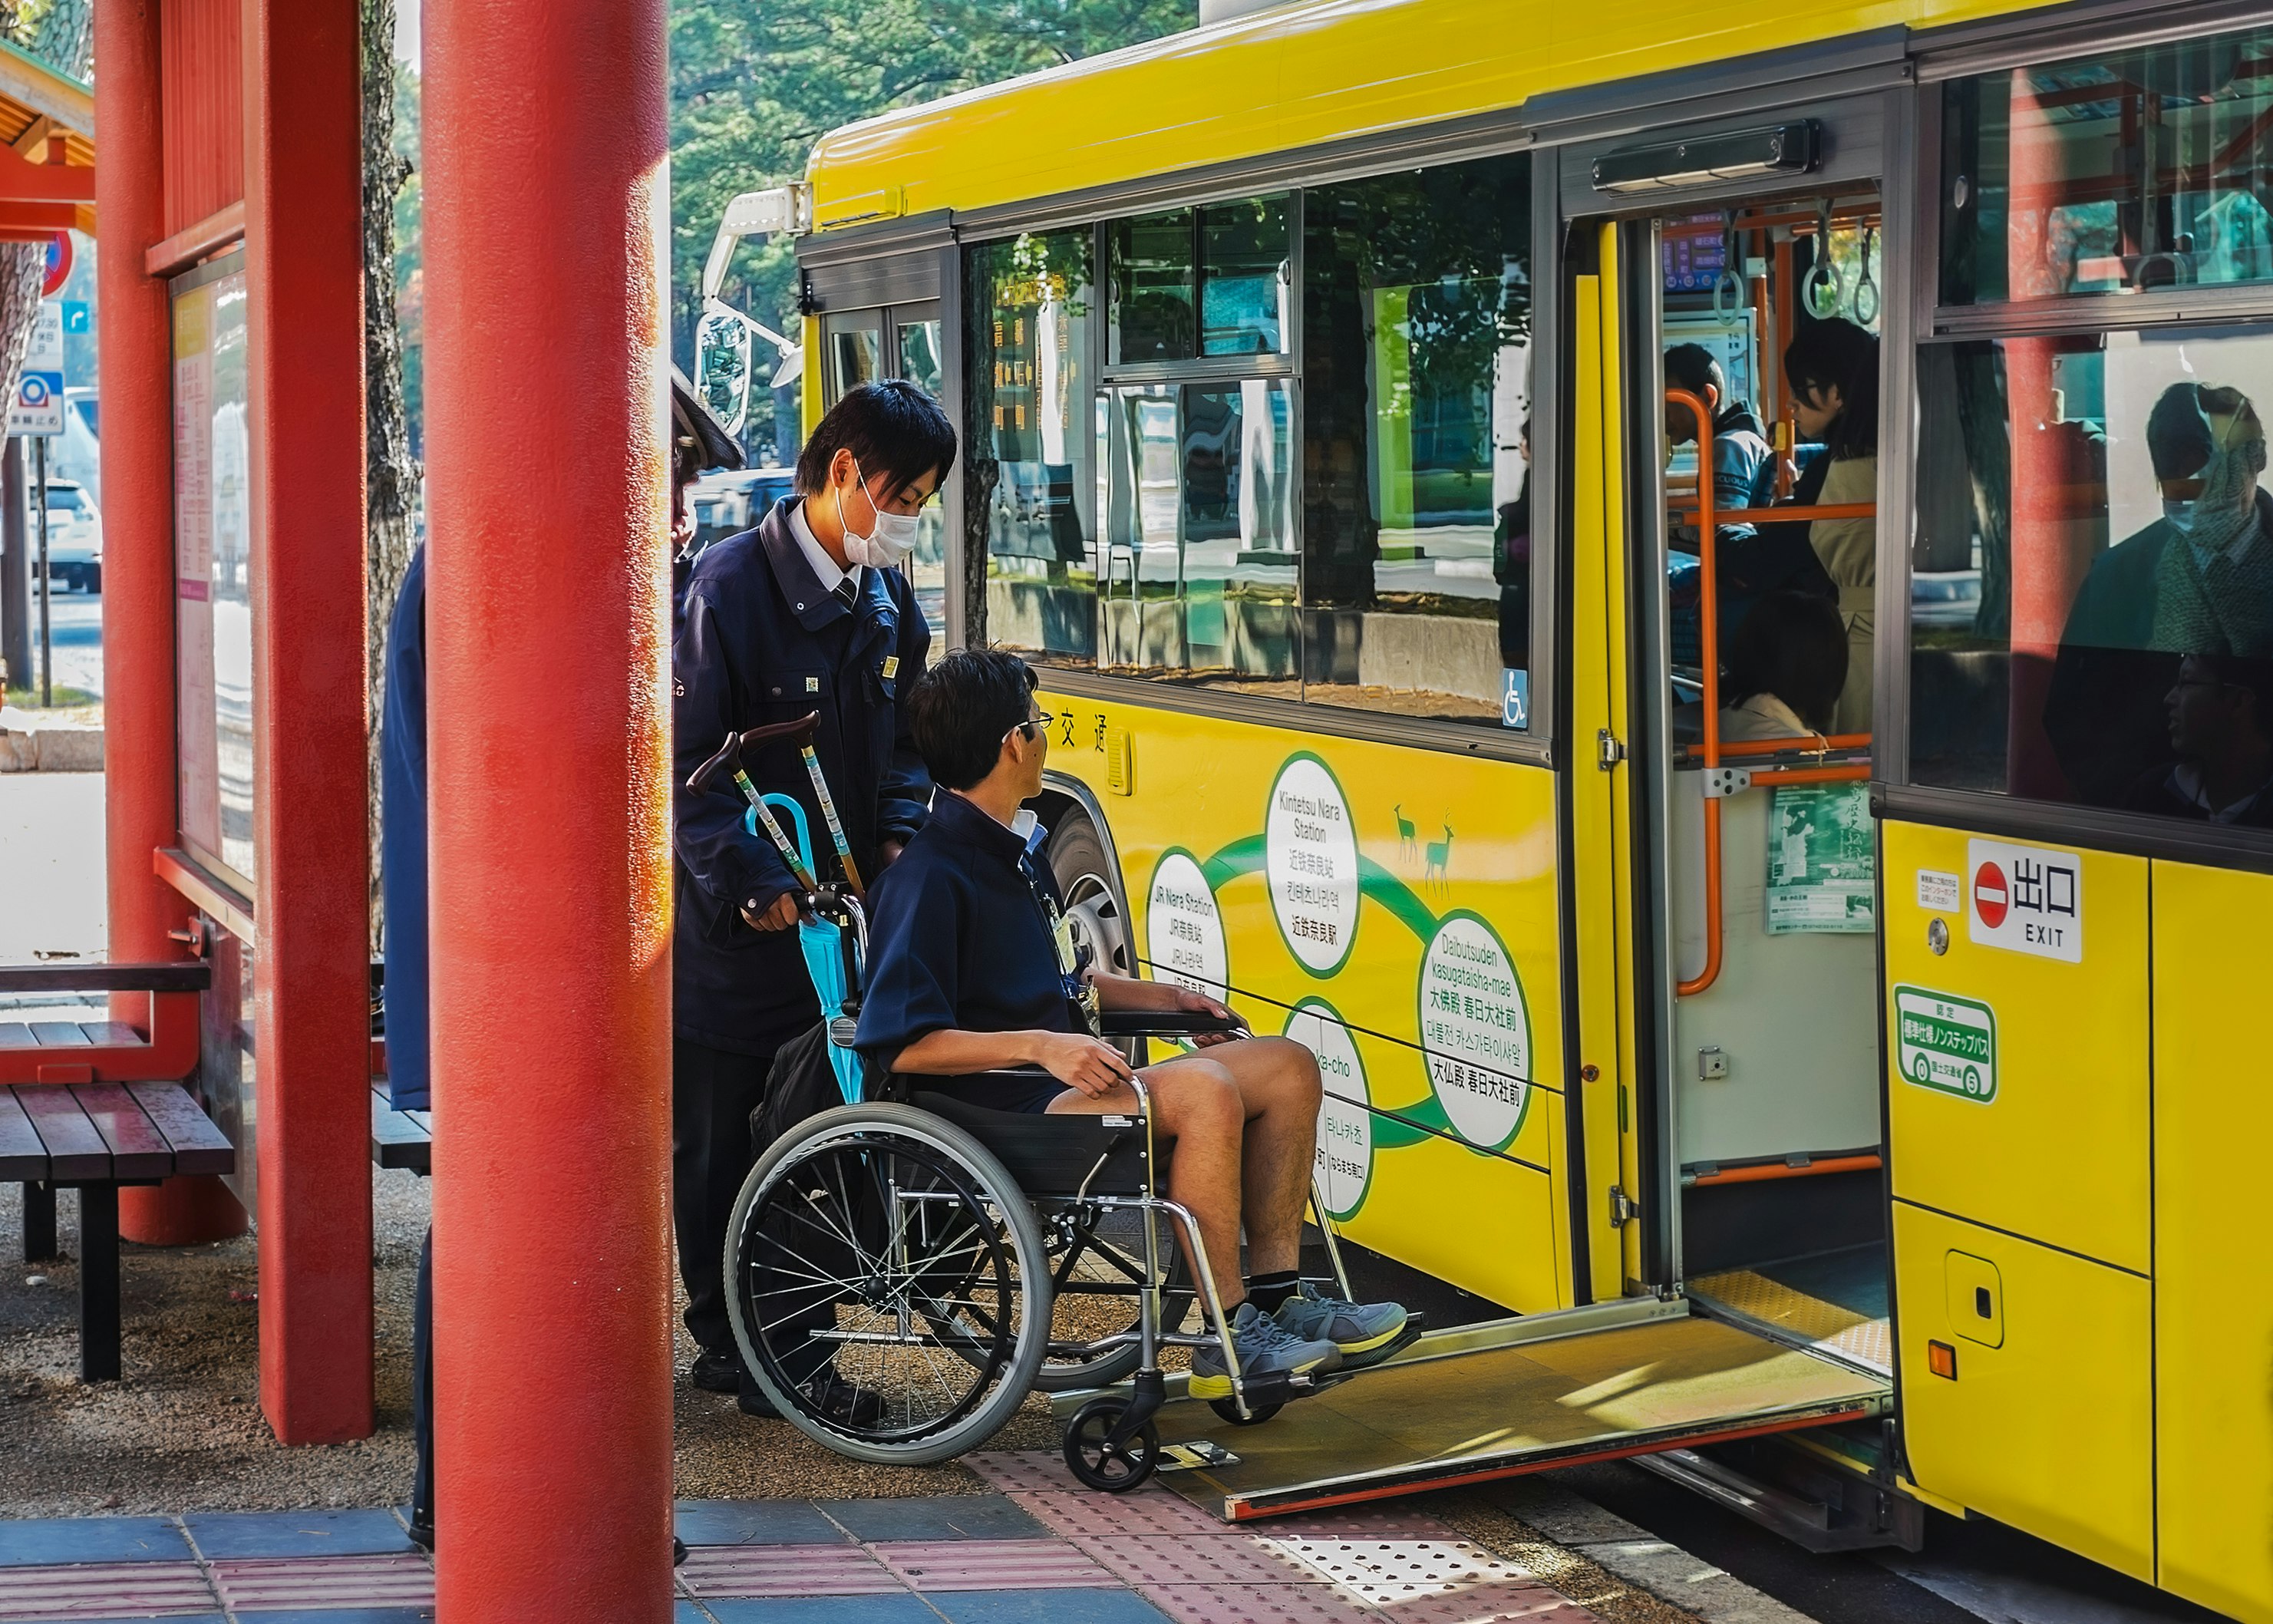 A man in a wheelchair is helped onto a bus, via a temporary ramp, in Nara, Japan.